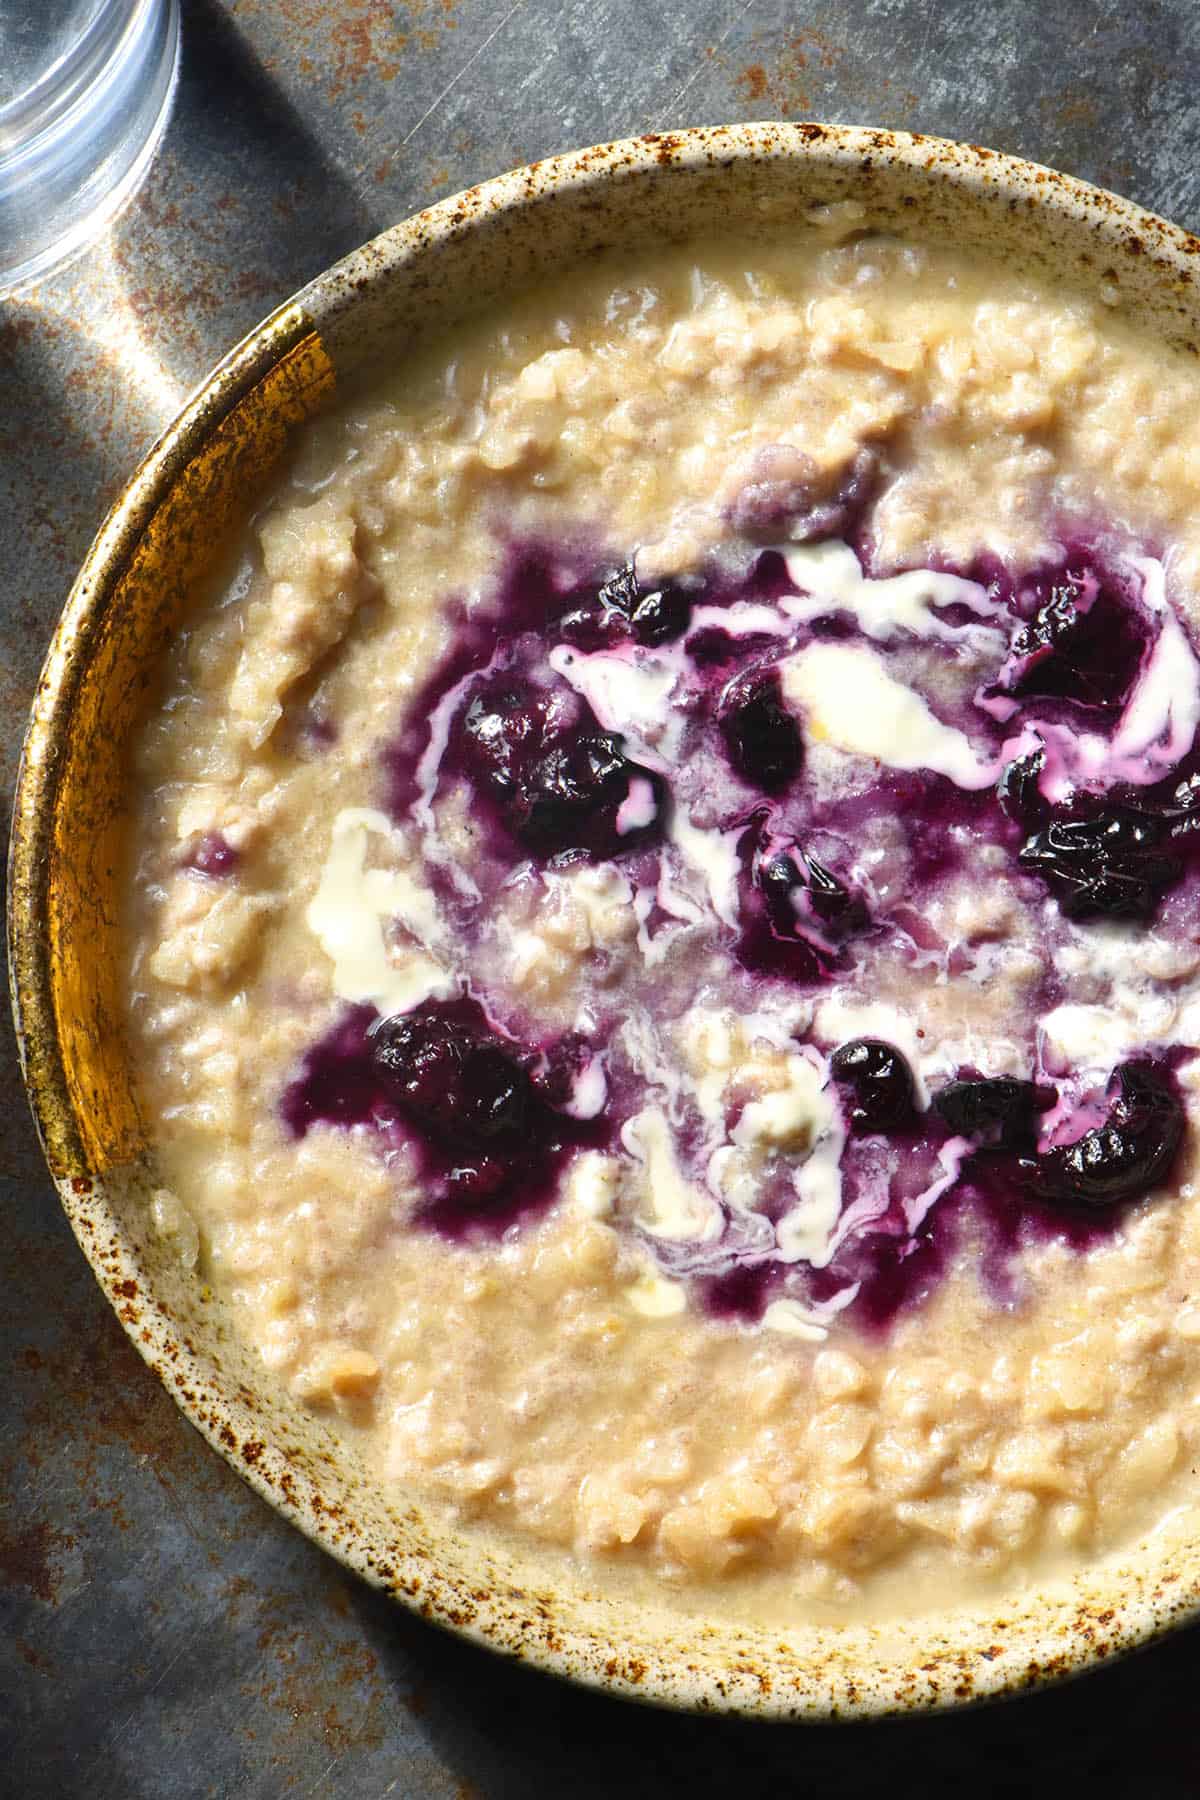 An aerial close up image of a bowl of gluten free porridge topped with blueberry compote and cream